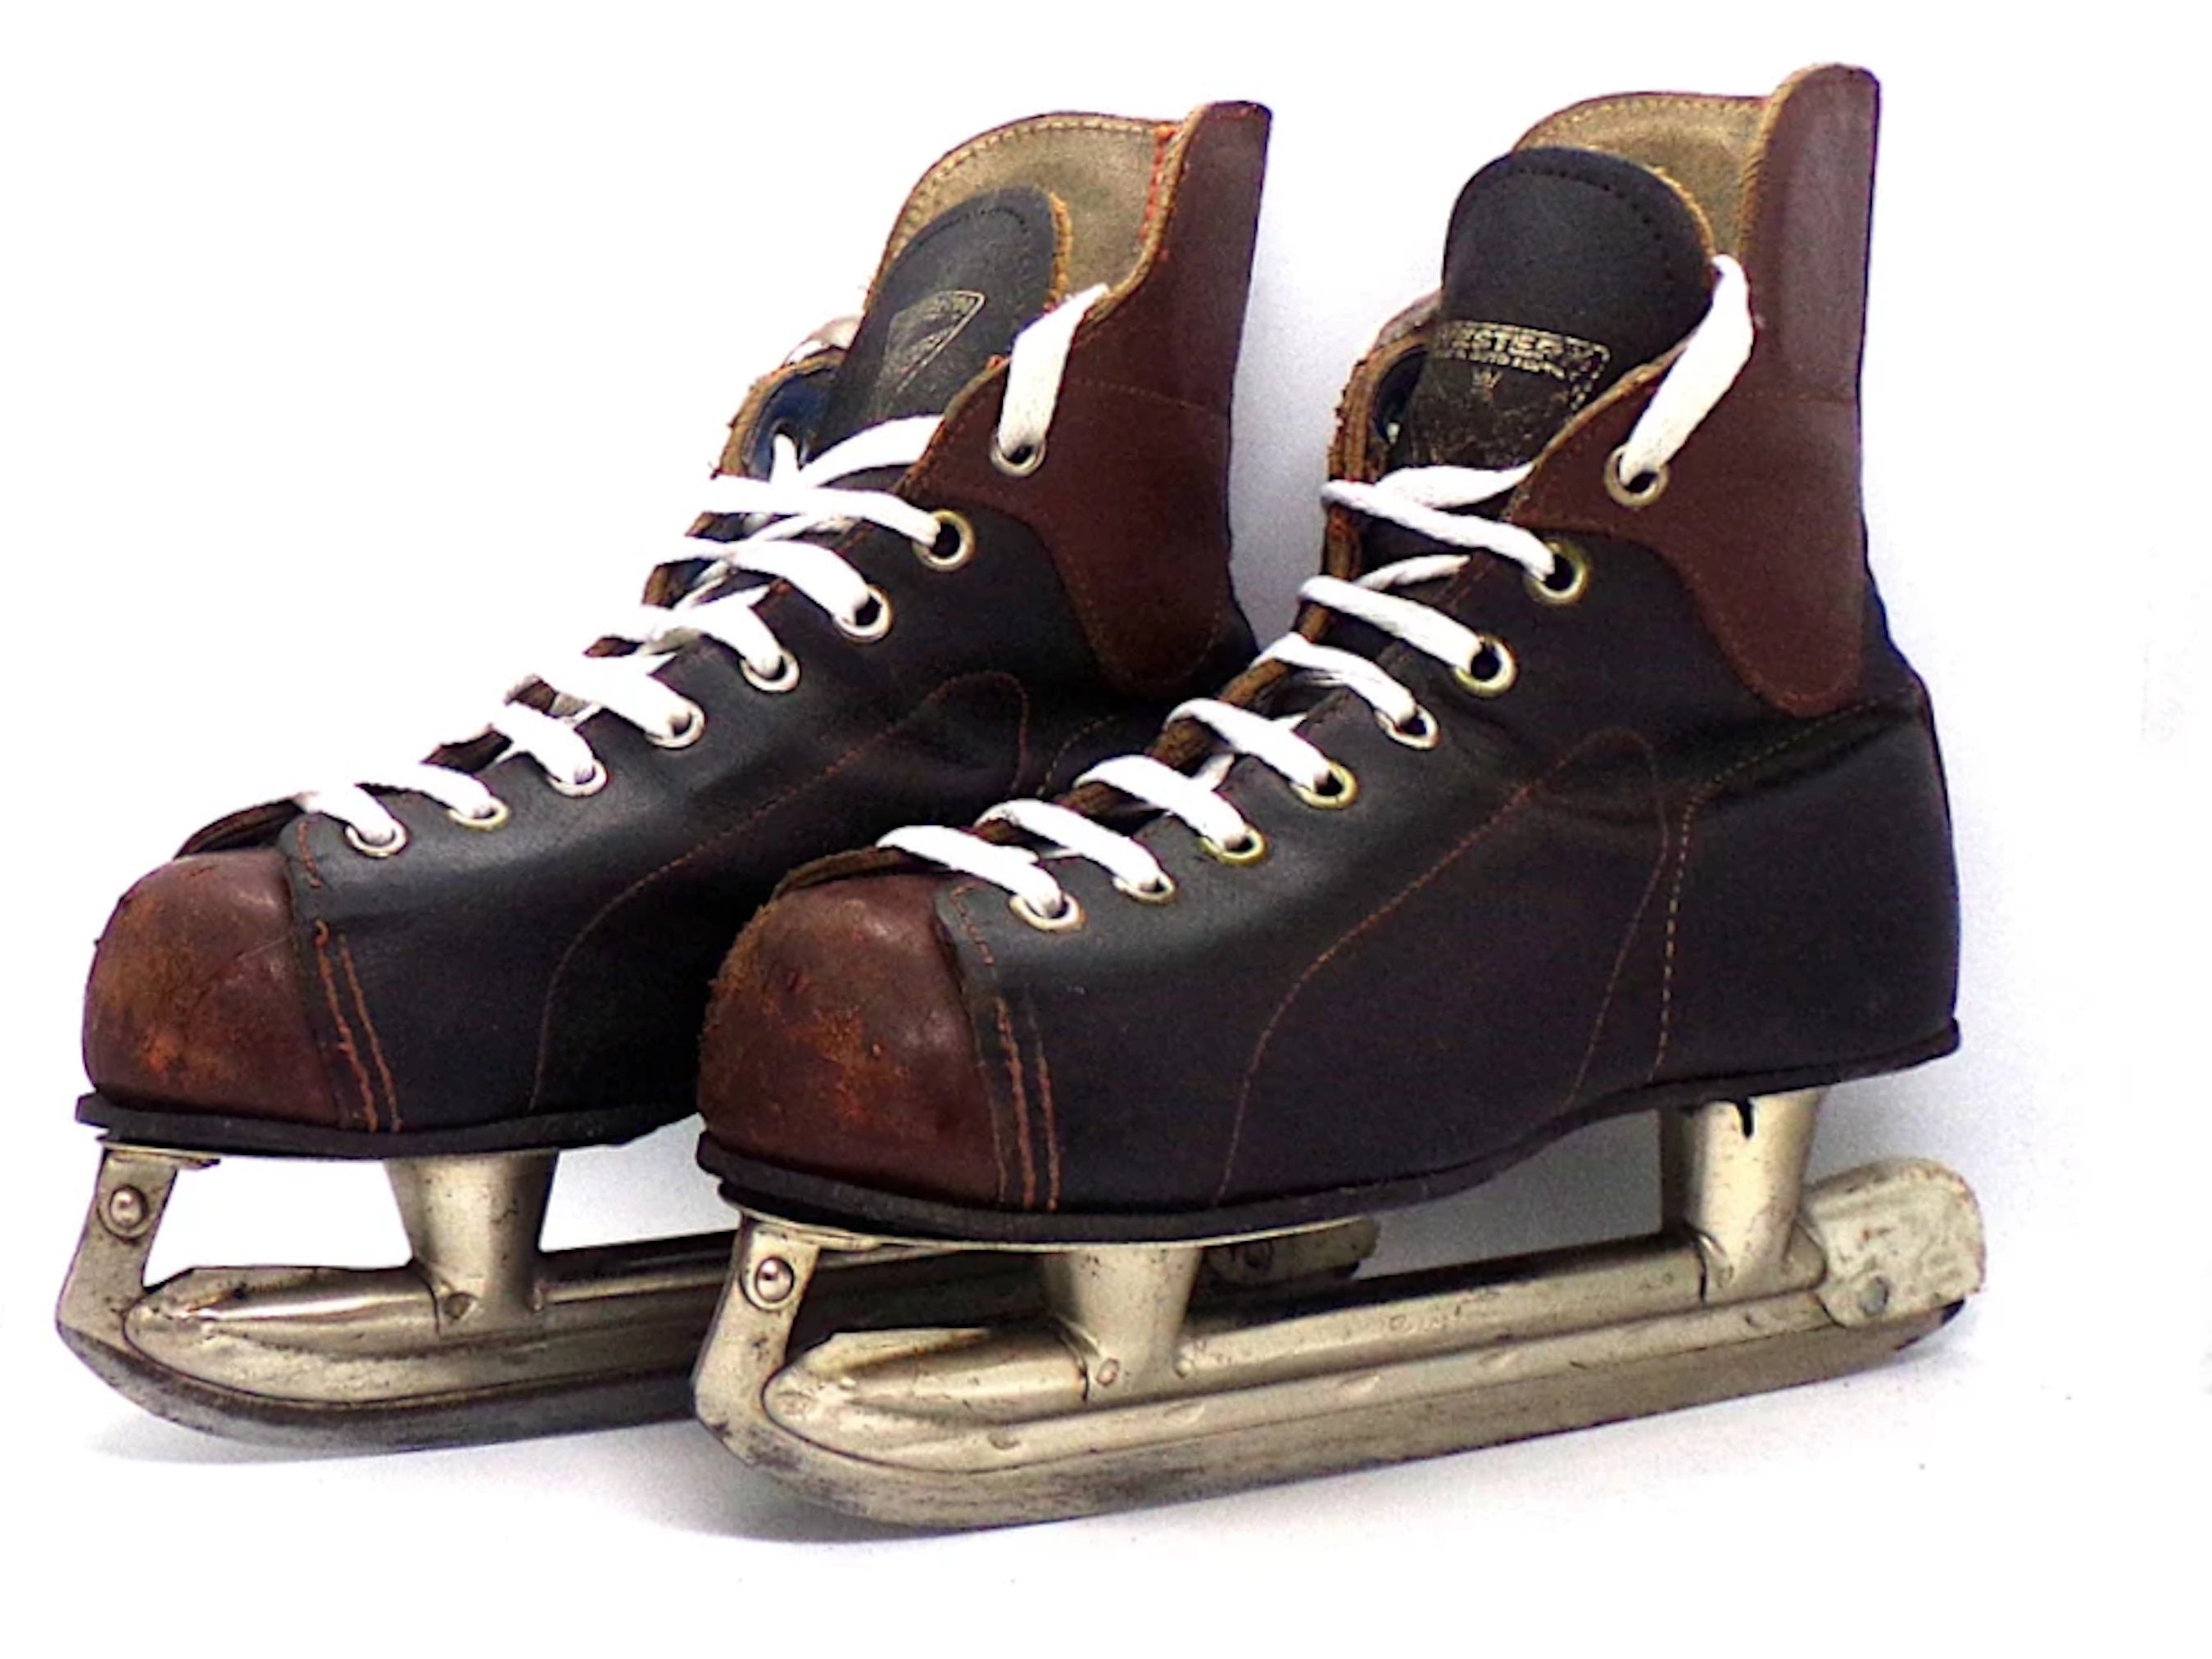 Vintage Junior Hockey Skates From the 1960s Leather 2 Tone